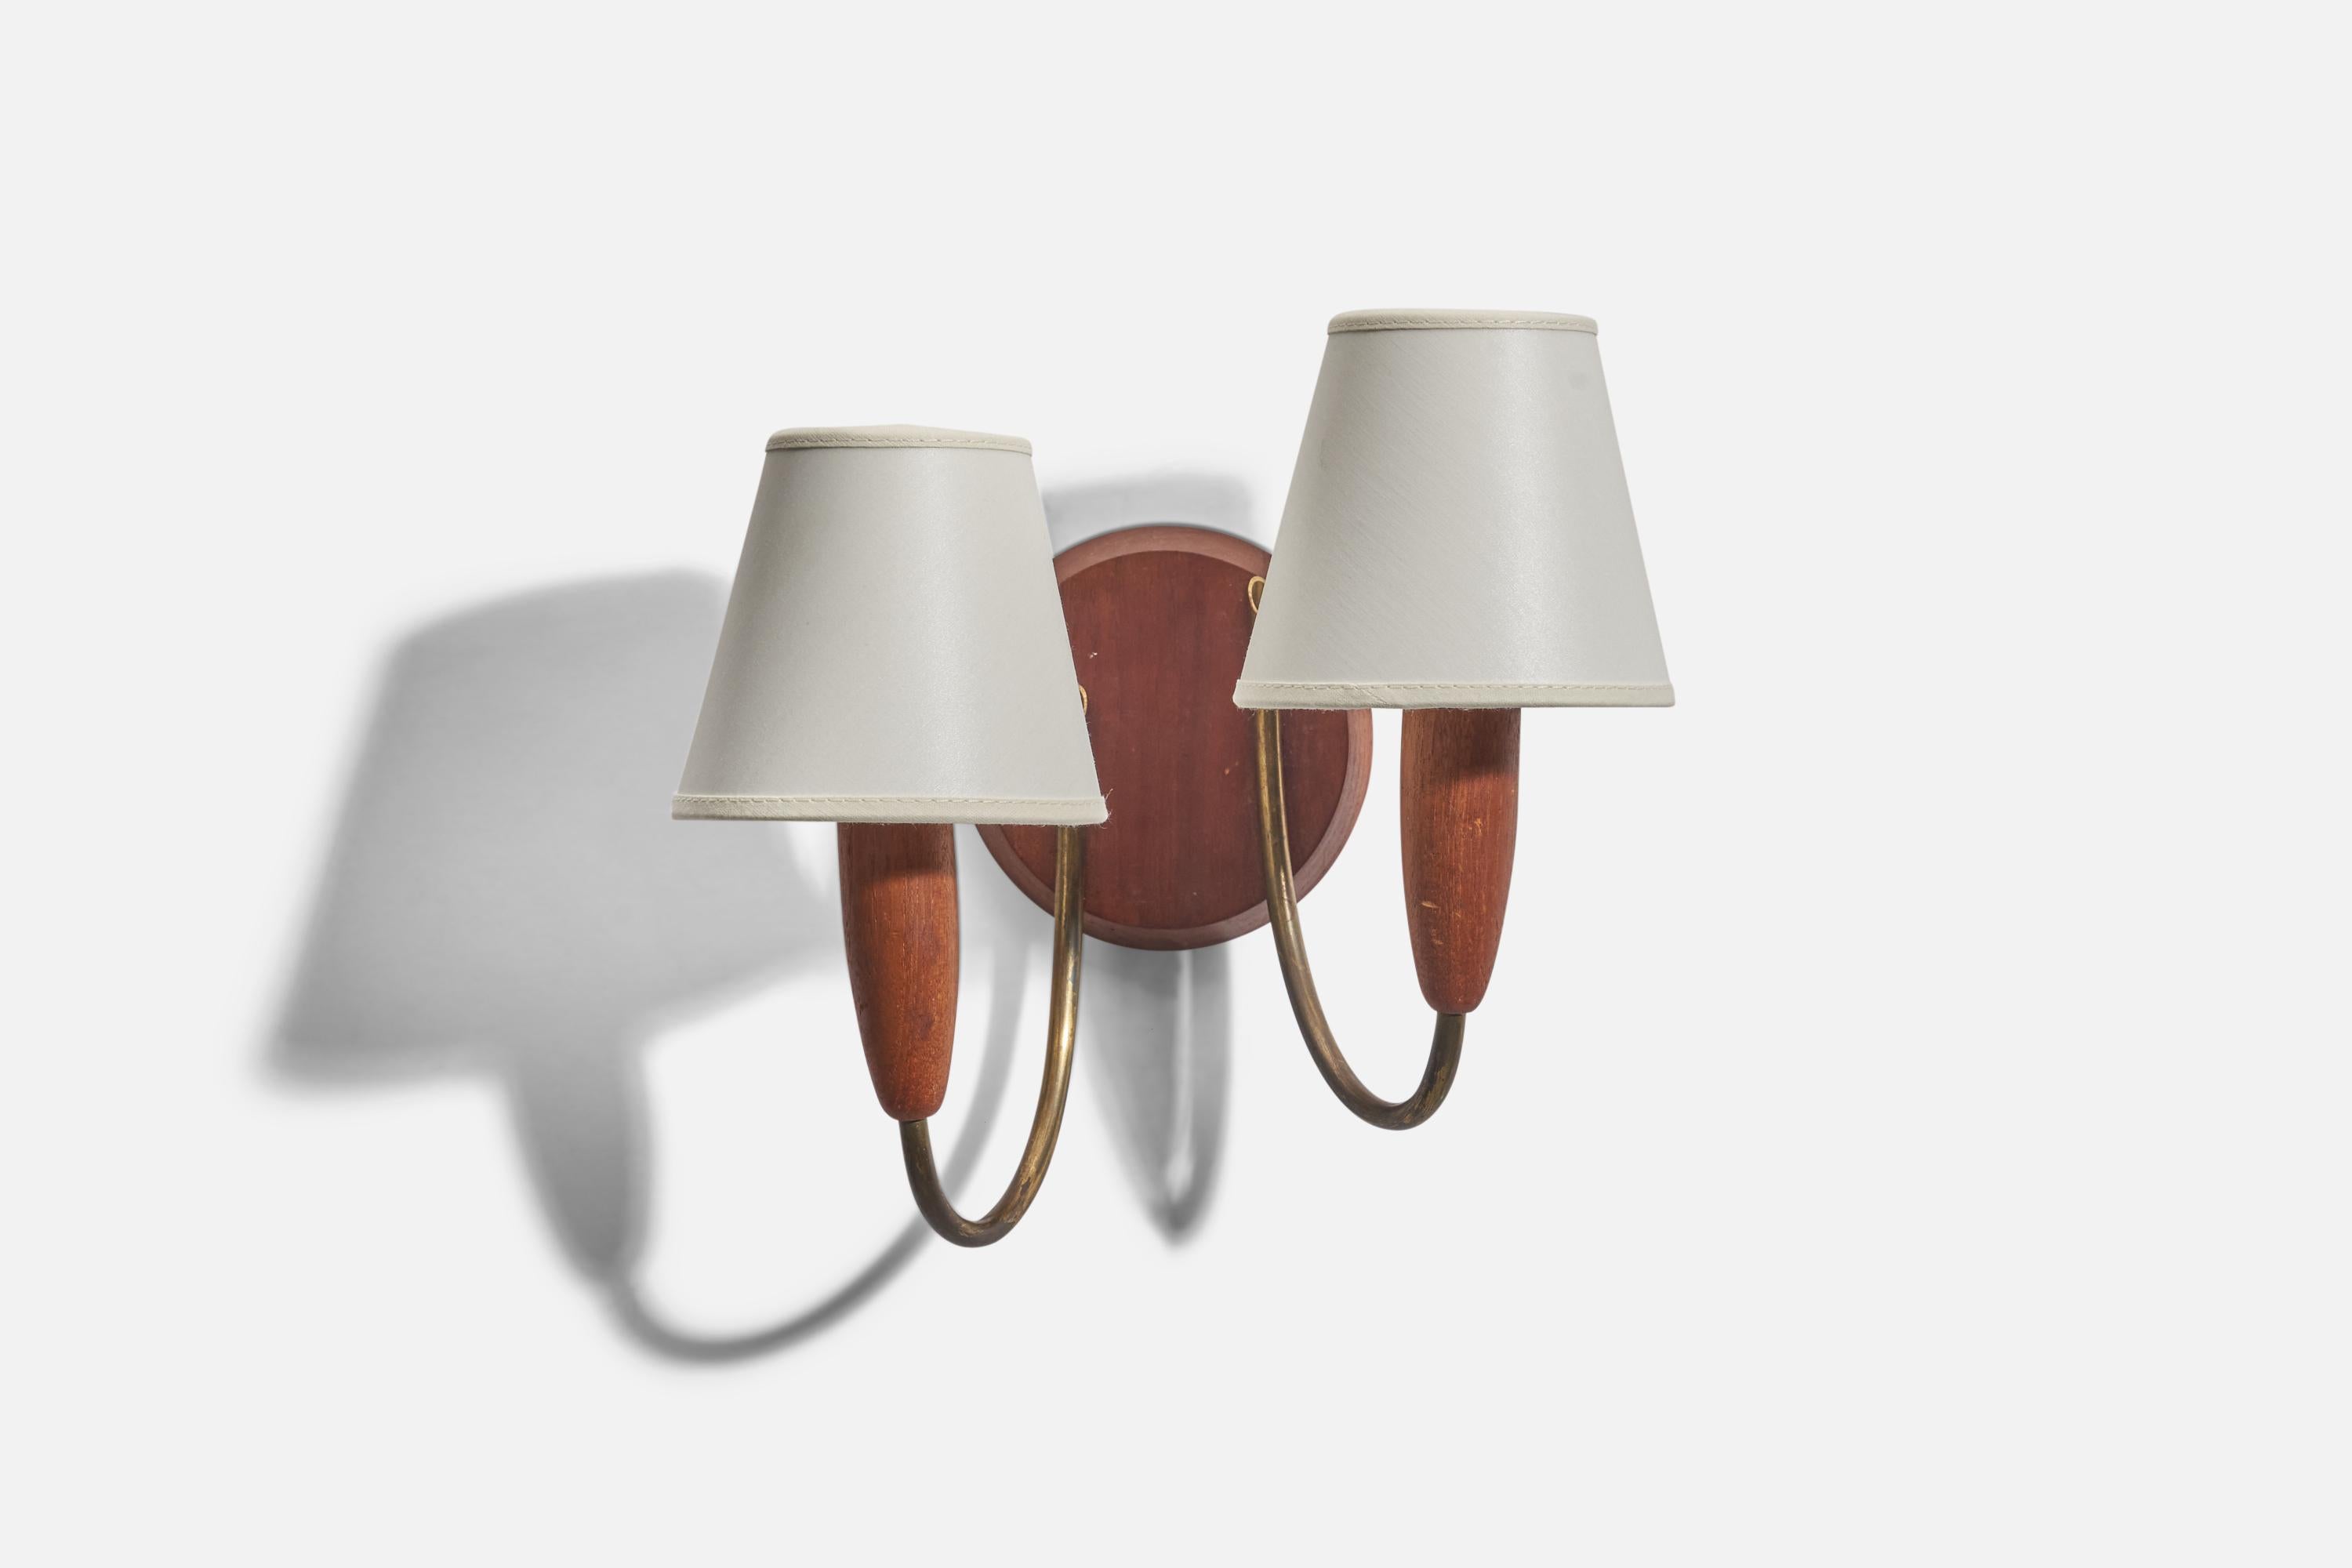 A teak, brass and fabric sconce designed and produced in Denmark, 1950s.

Sold with Lampshades. Dimensions stated are of Sconce with Lampshades.

Dimensions of Back Plate (inches) : 4.56 x 4.56 x 0.68 (Height x Width x Depth)

Sockets take